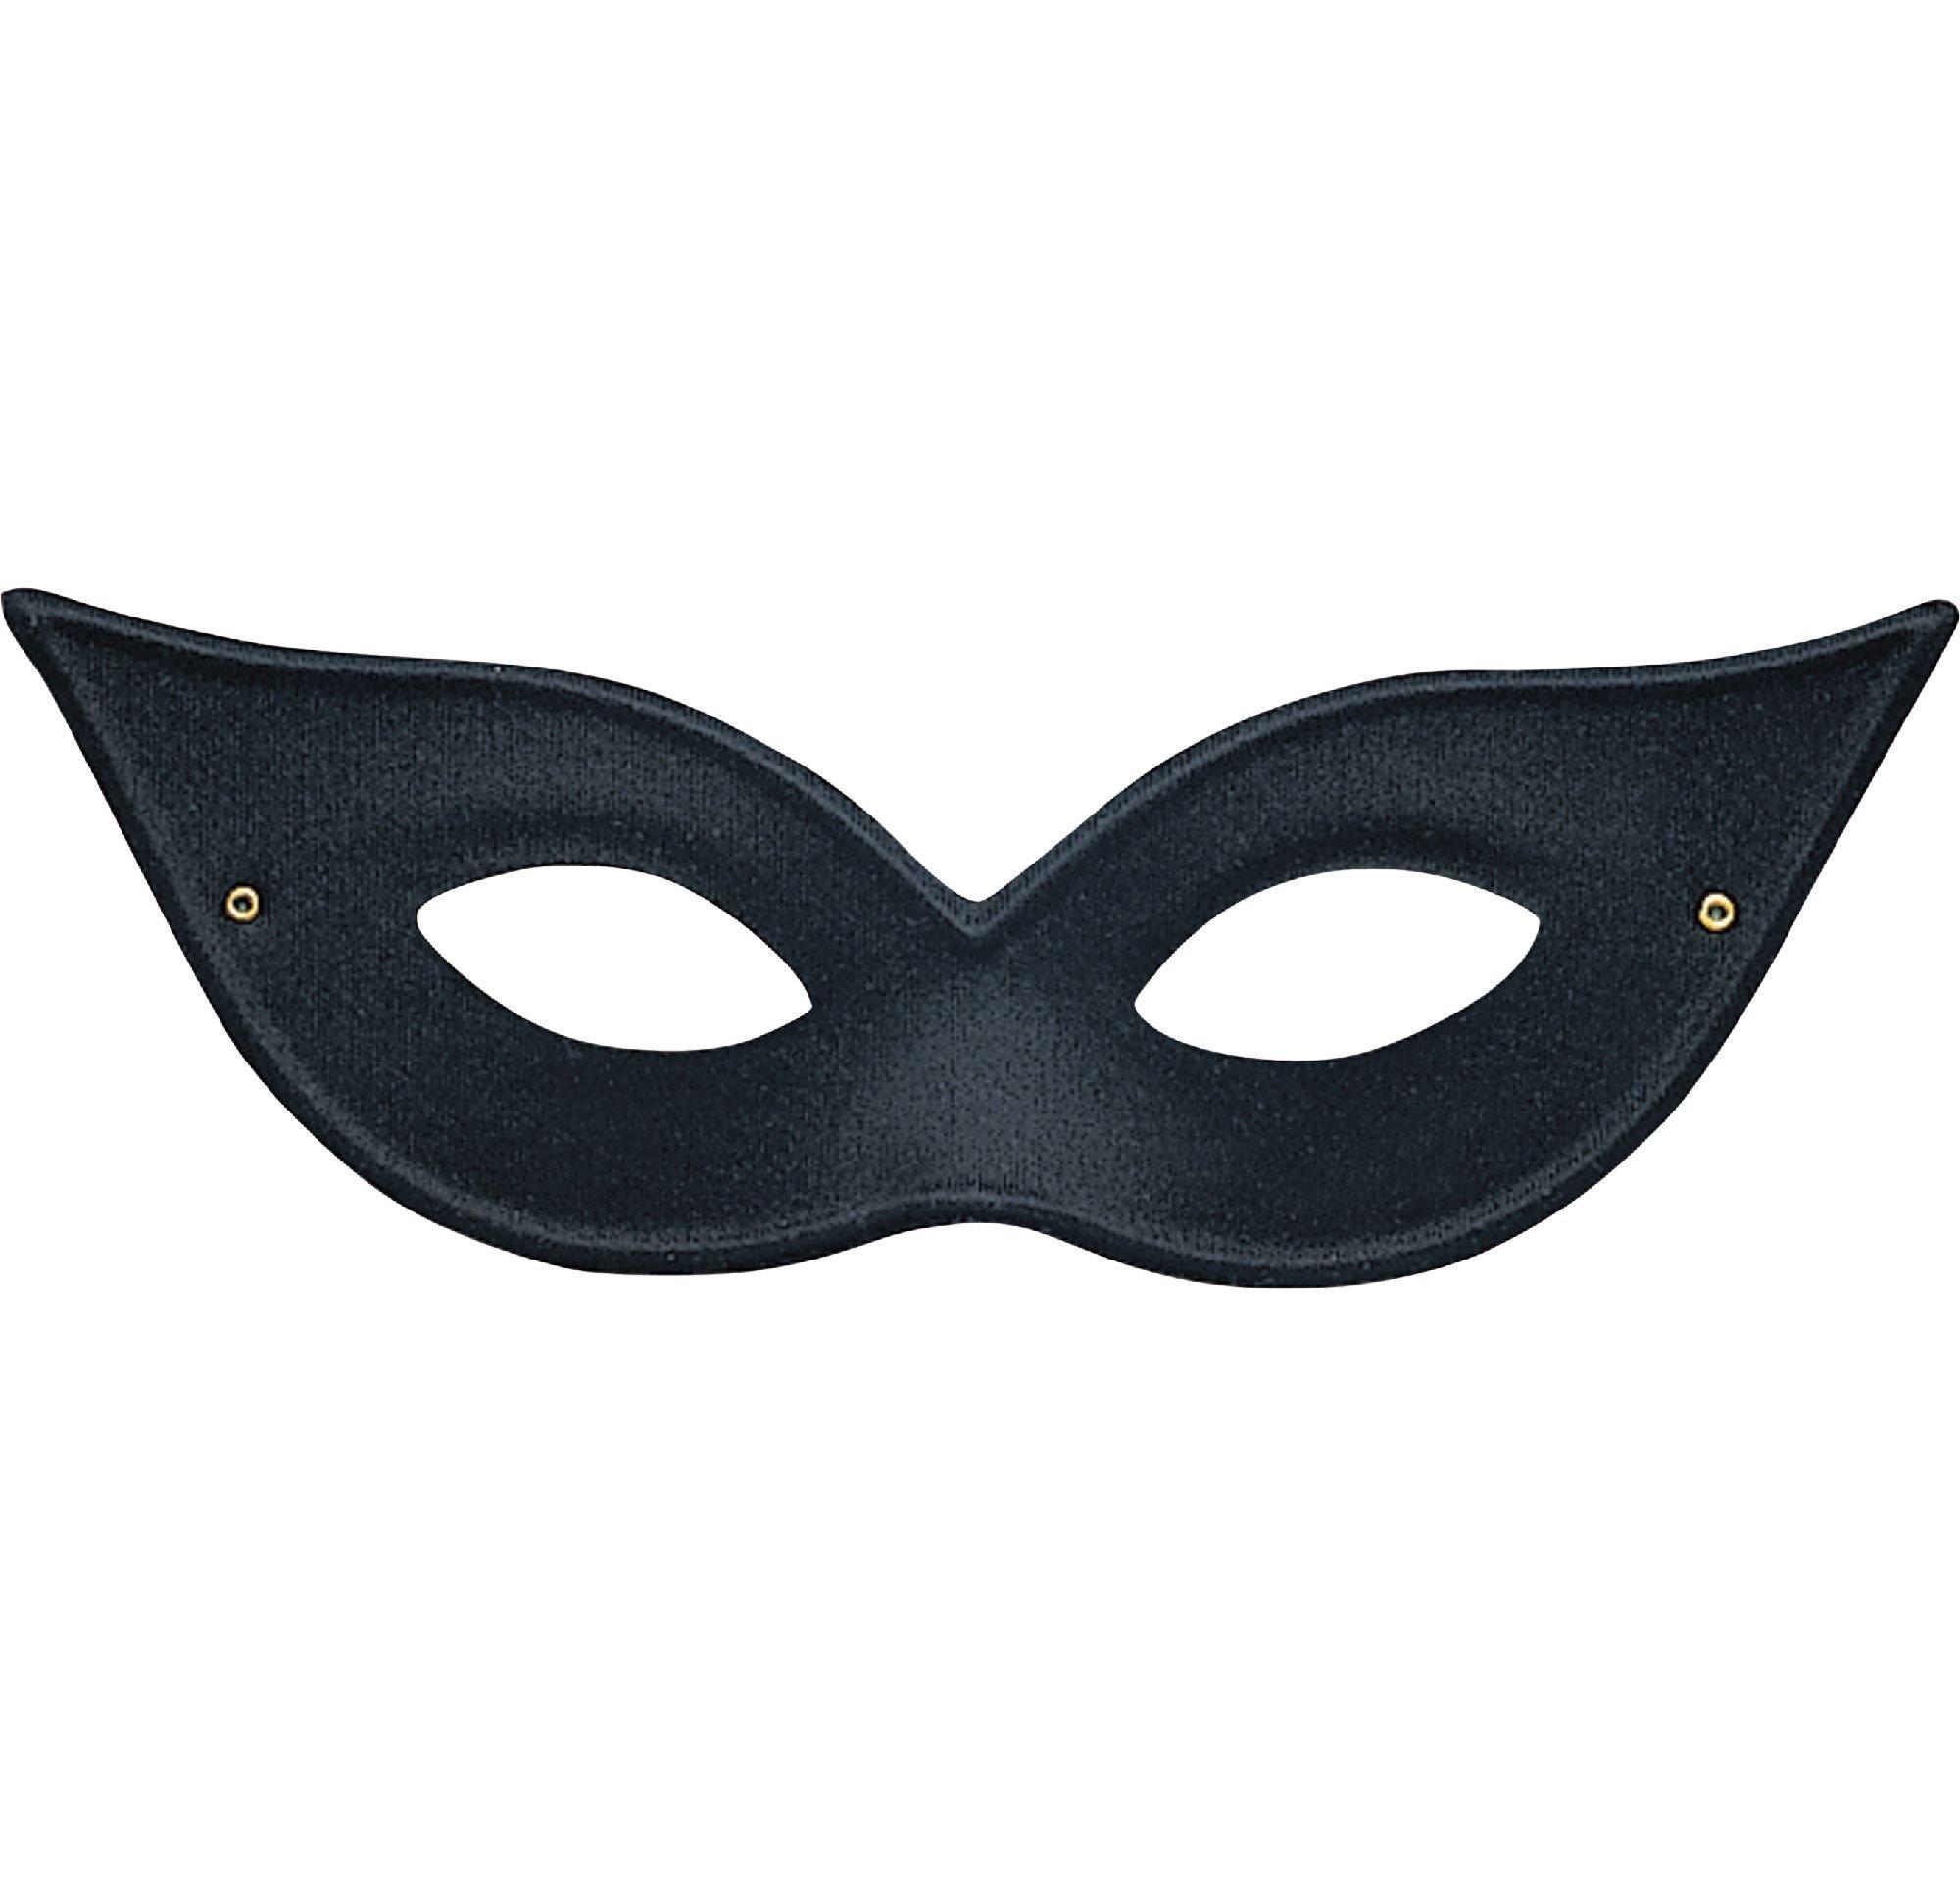 Sprede Ældre Memo Black Winged Eye Mask 7 1/2in x 2 1/2in | Party City